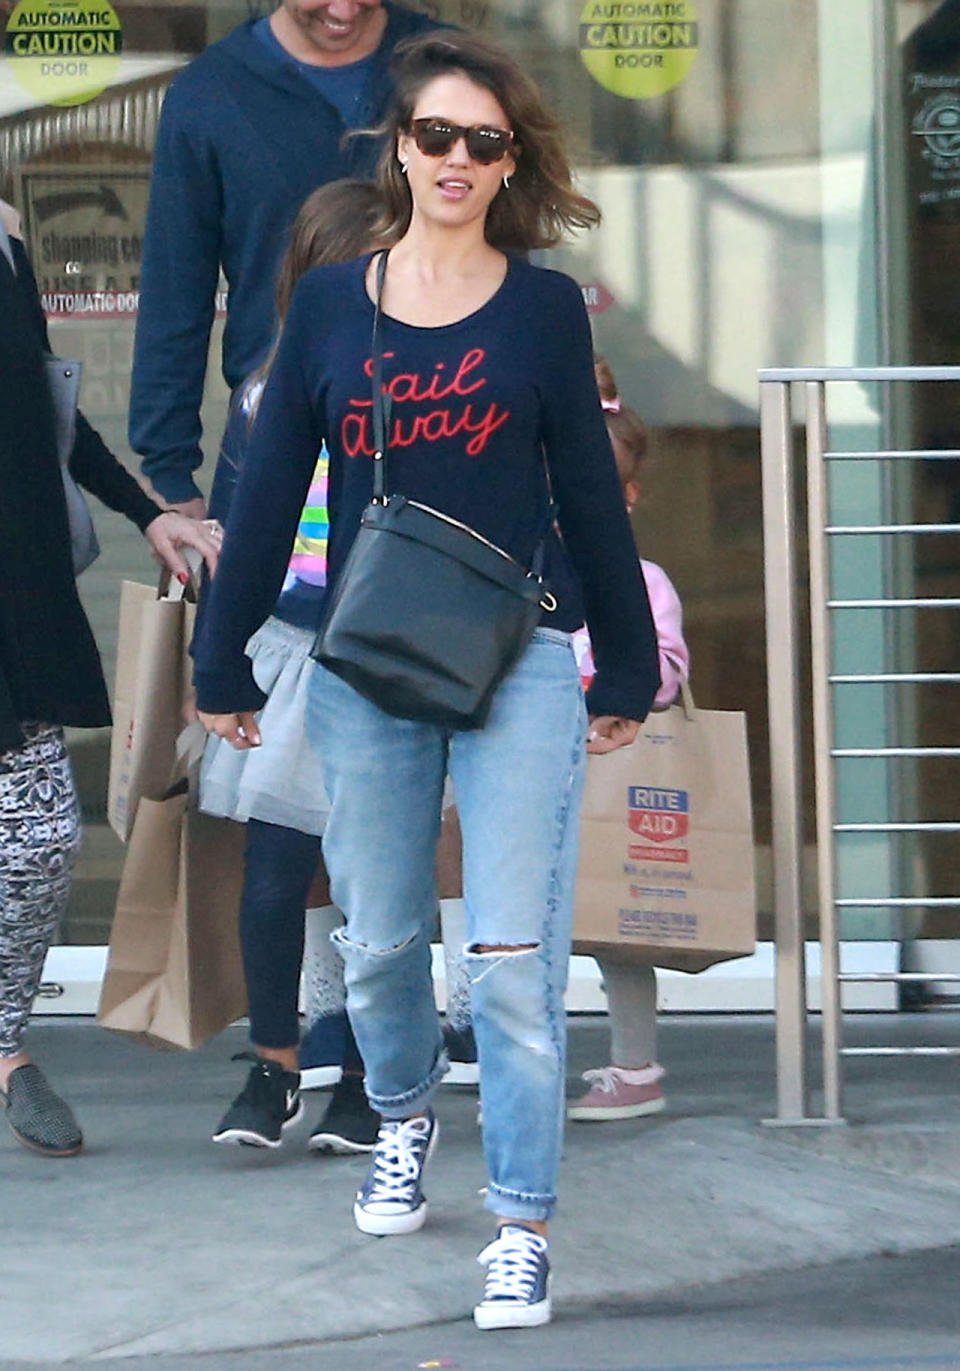 Jessica Alba in a navy “Sail Away” sweater.